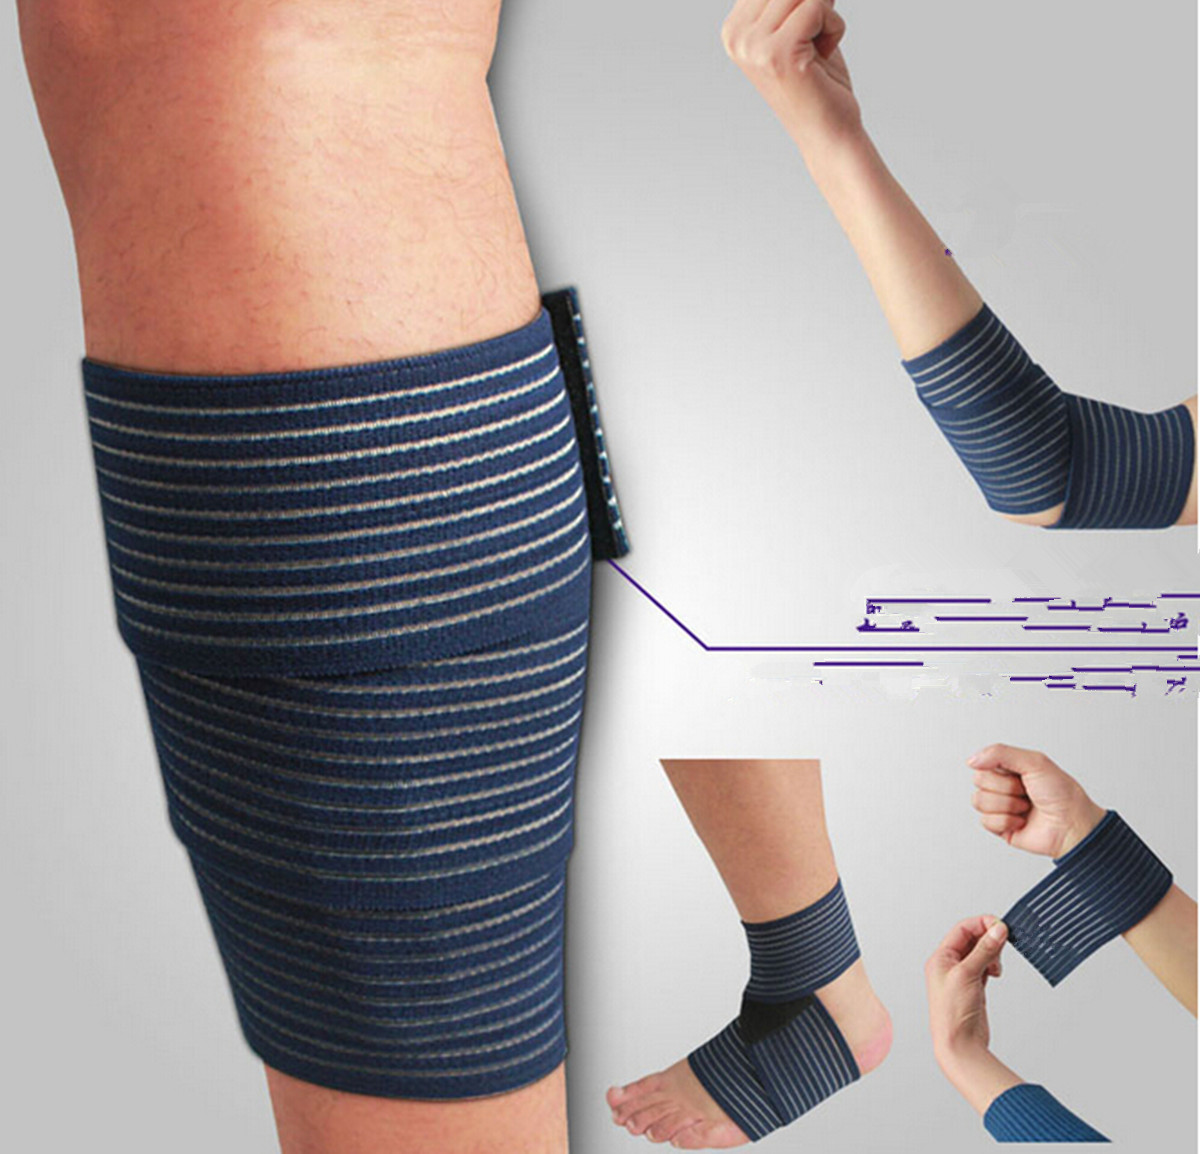 Elastic-Sports-Bandage-Knee-Pad-Support-Wrap-Knee-Band-Brace-Elbow-Calf-Arm-Support-950117-3